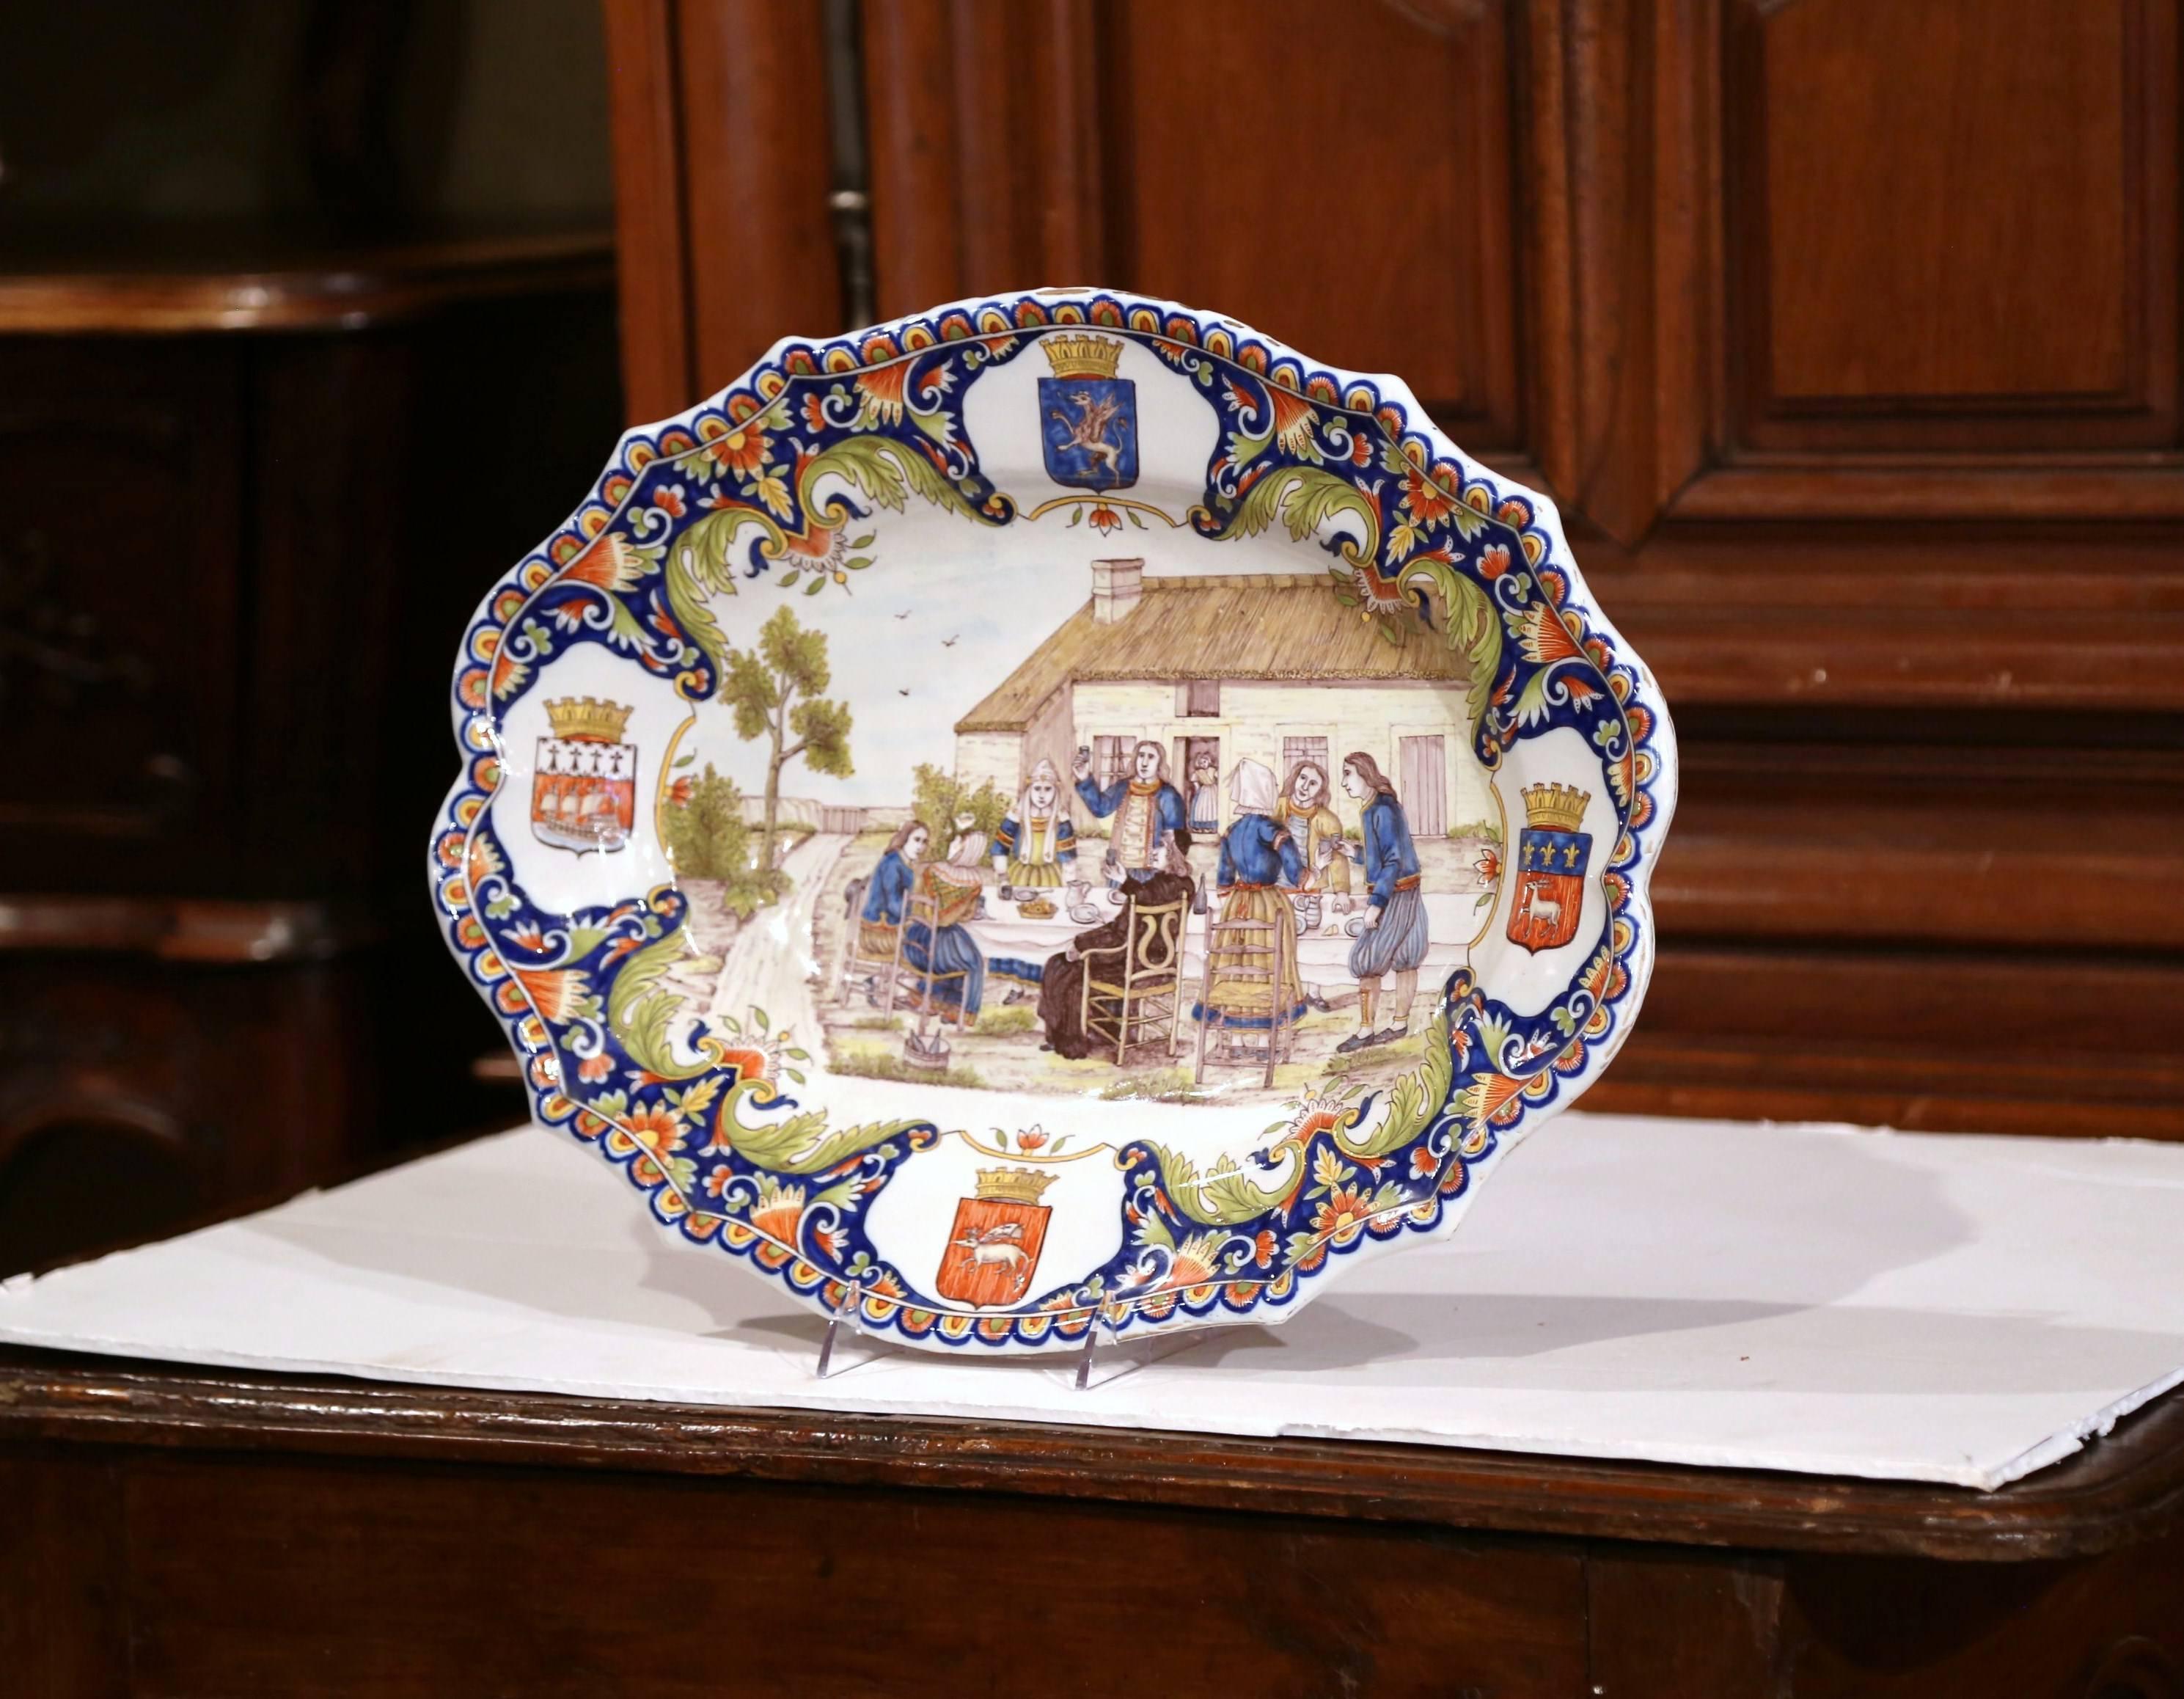 This large ceramic platter was sculpted in Brittany, France, circa 1880. The colorful, antique plate features a hand painted, outdoor banquet scene with Breton people eating, drinking and dressed in traditional clothing. The oval platter is further